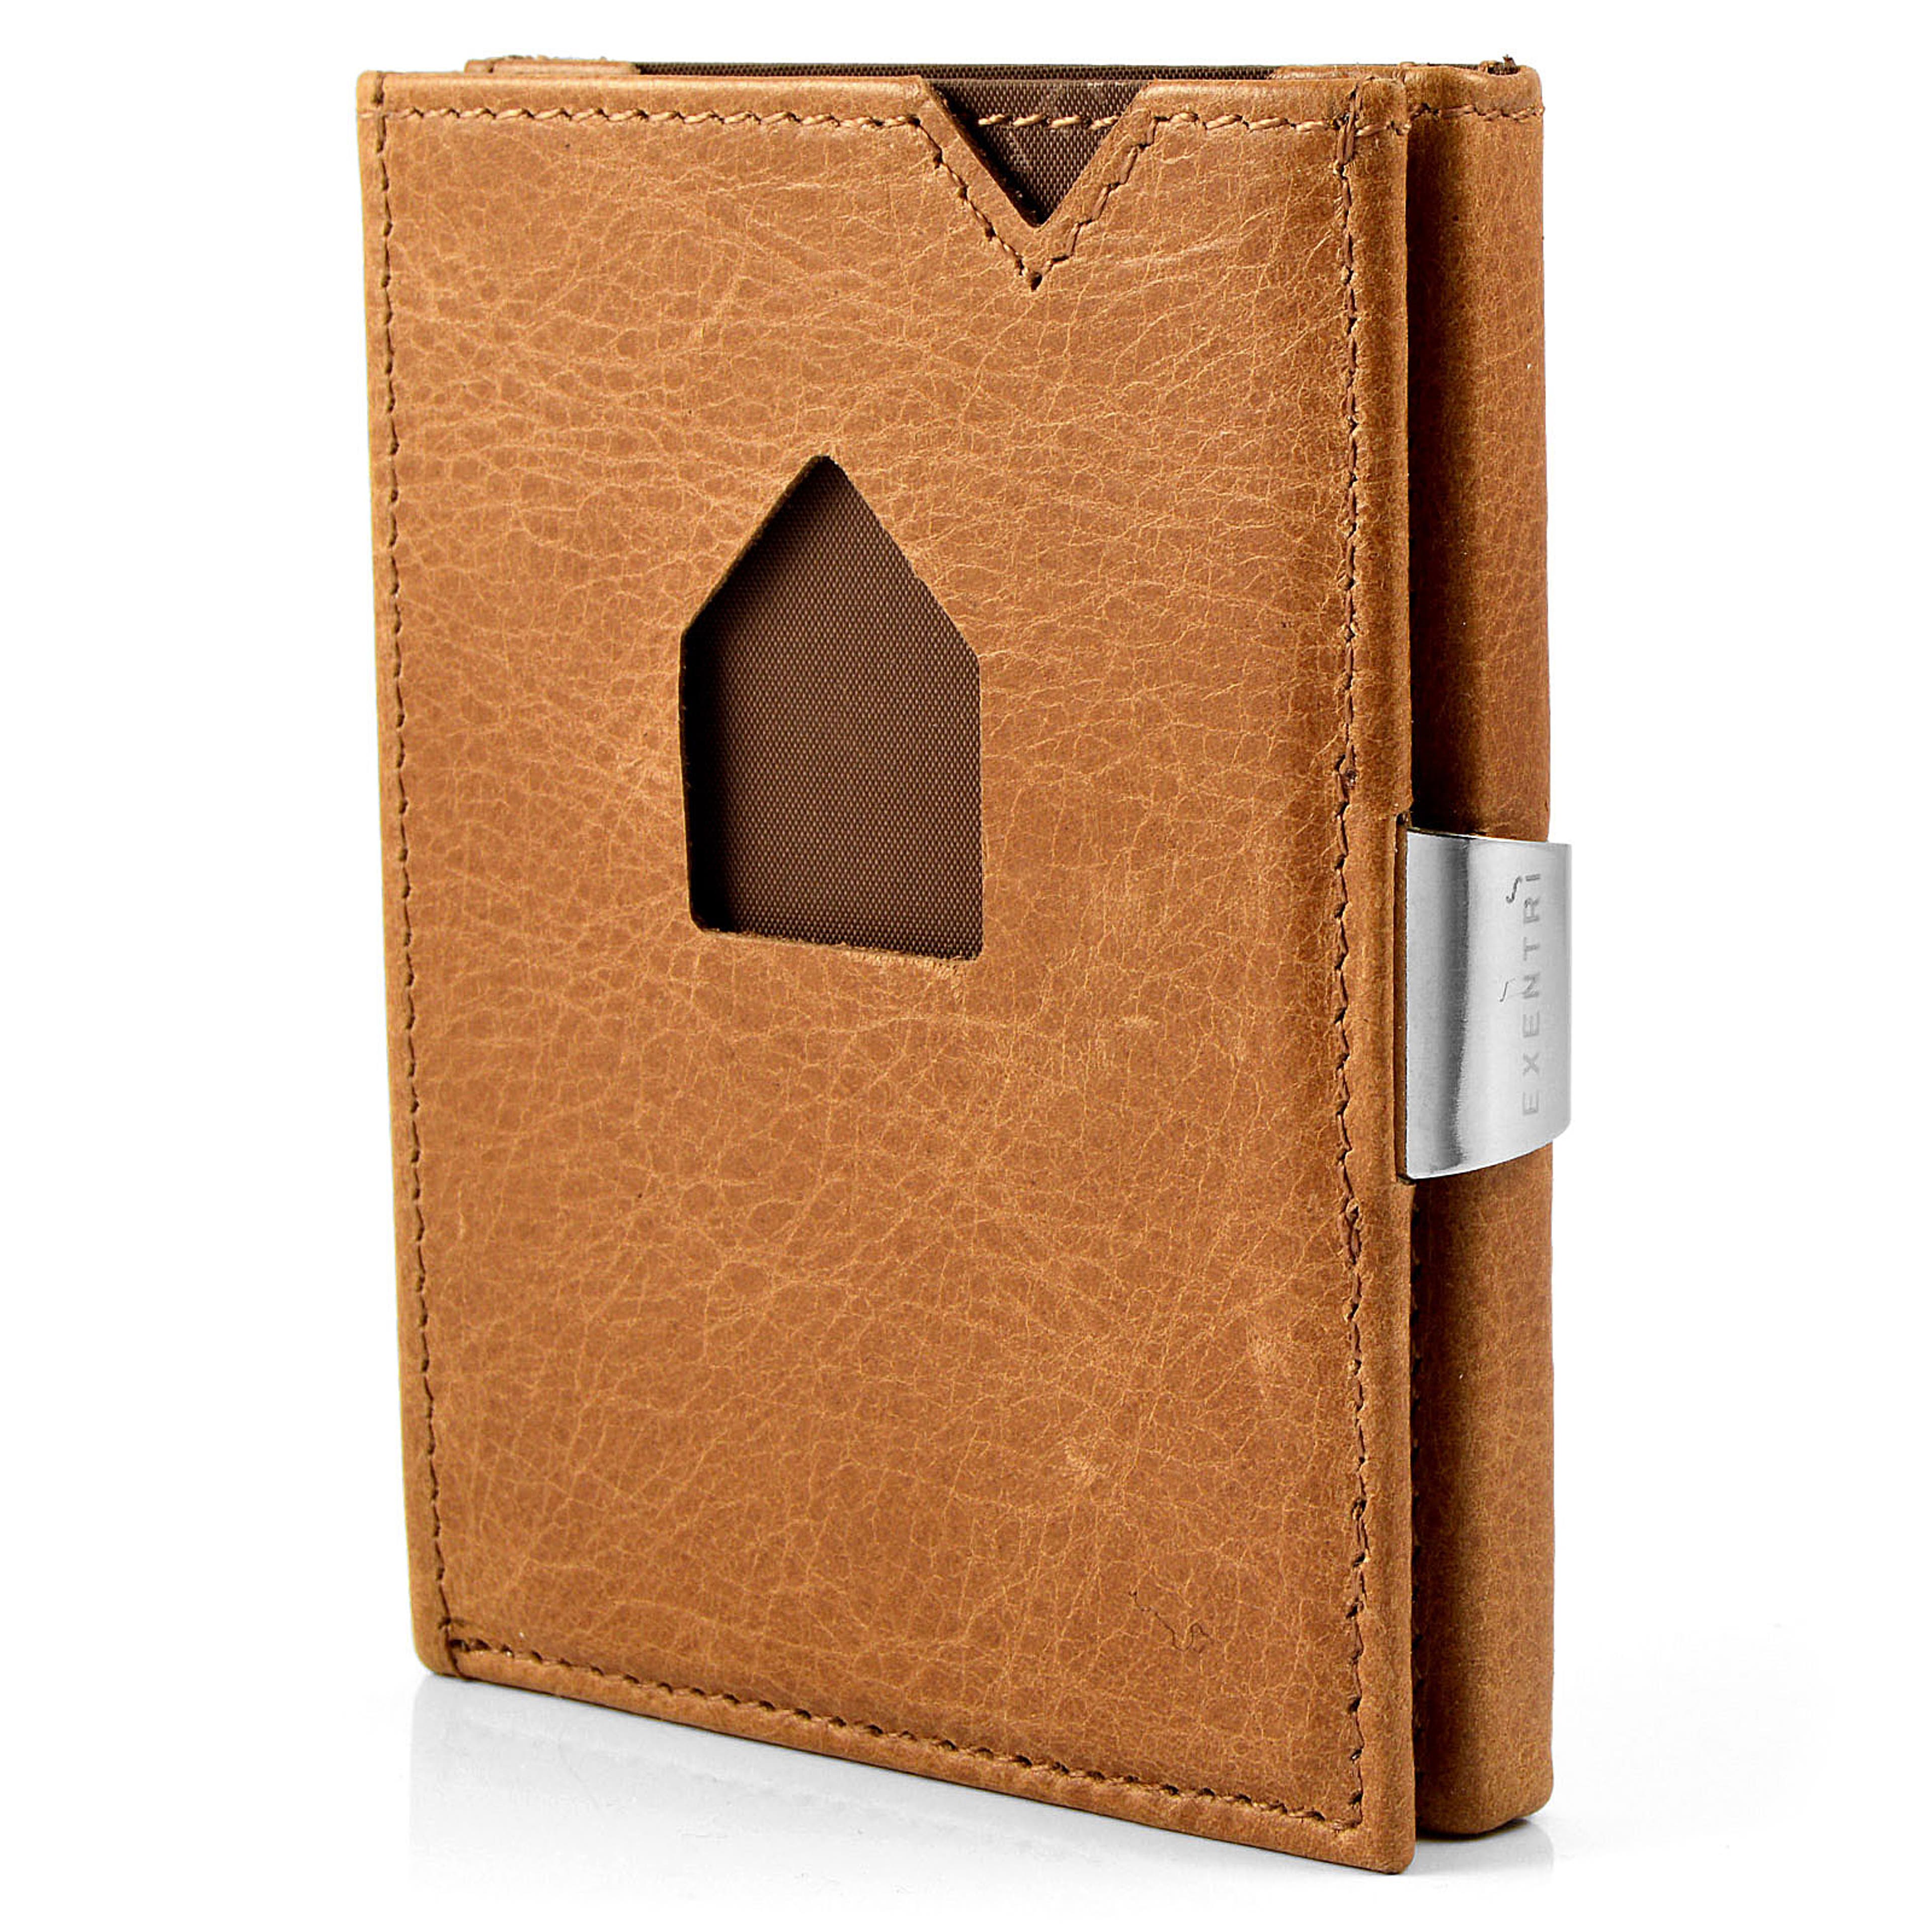 Tan Leather Card Holder With RFID Blocker